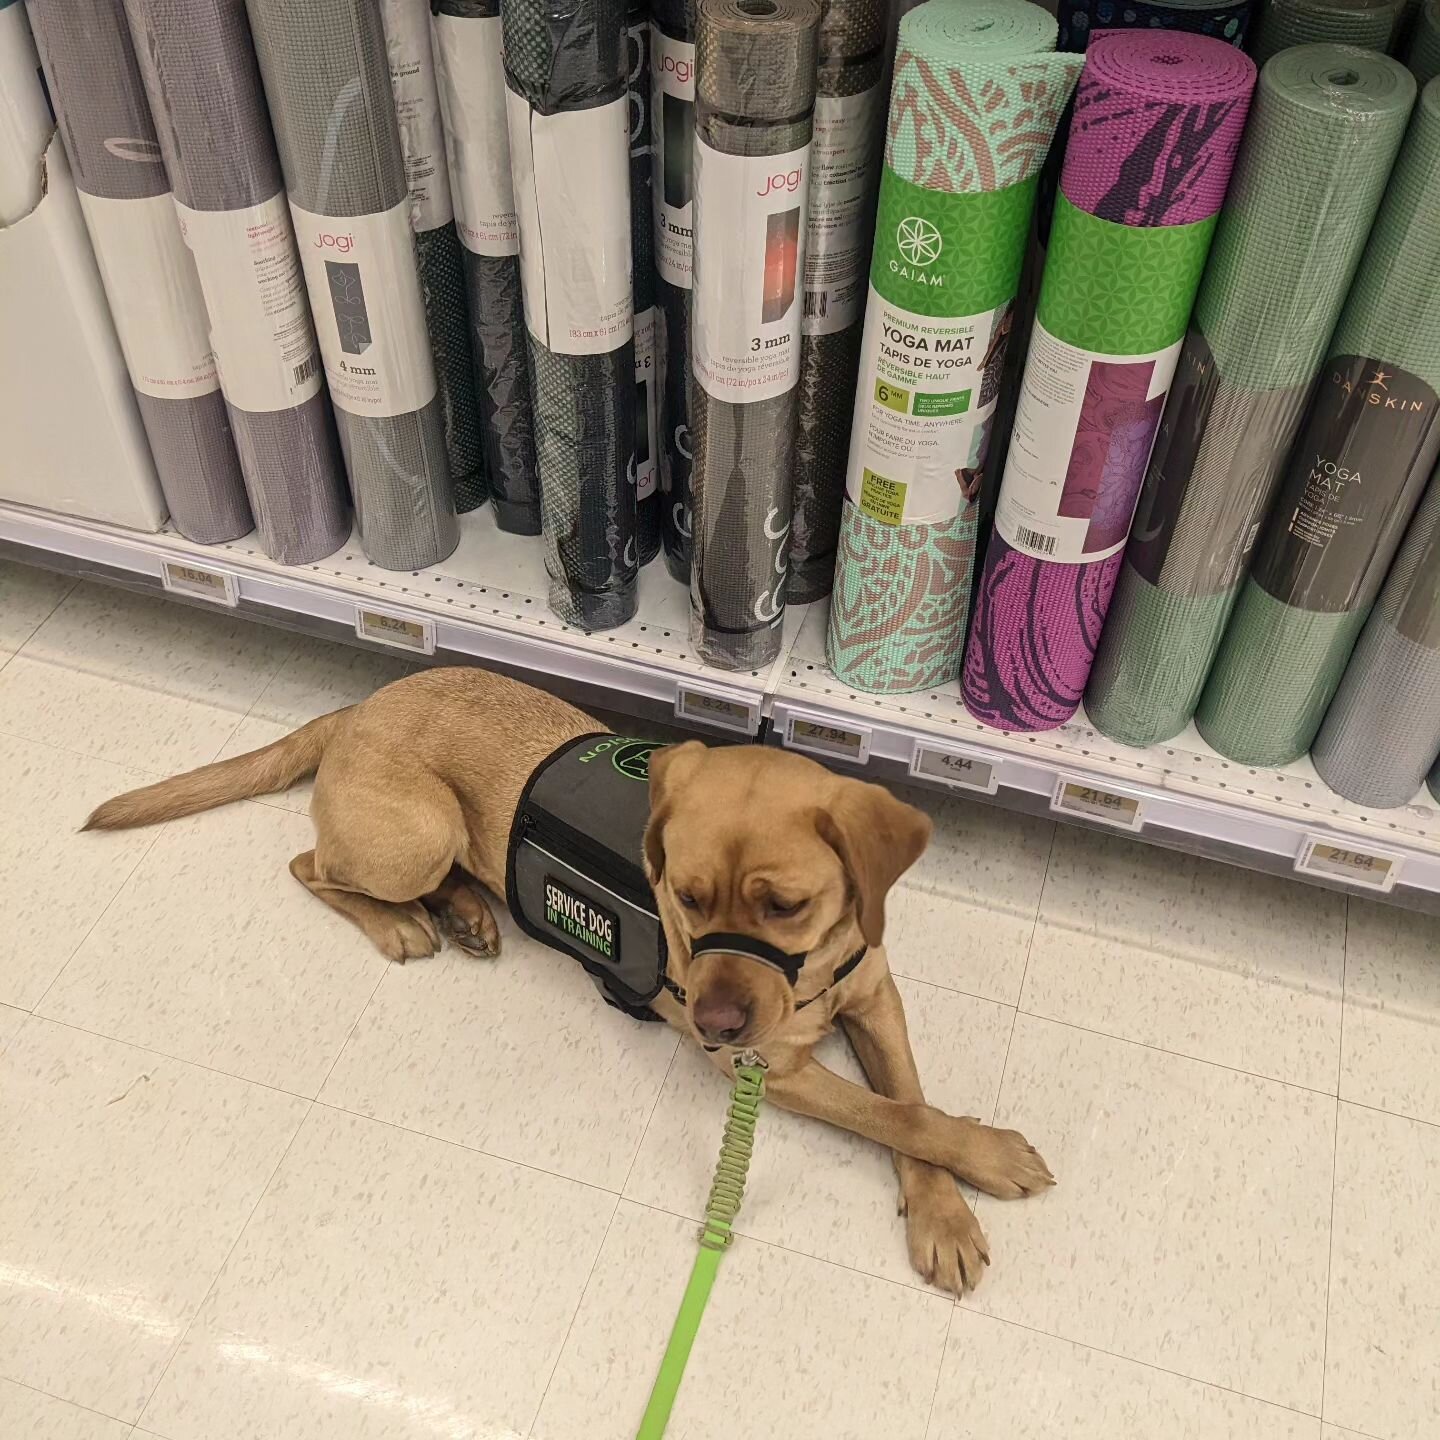 Princess Leia went to Superstore today to work on public access. Grocery stores are hard to work in! We've done a lot of practice and training in less distracting places to get here! #nodogleftbehind #ndlb #servicedogprospect #publicaccess #goodgirl 